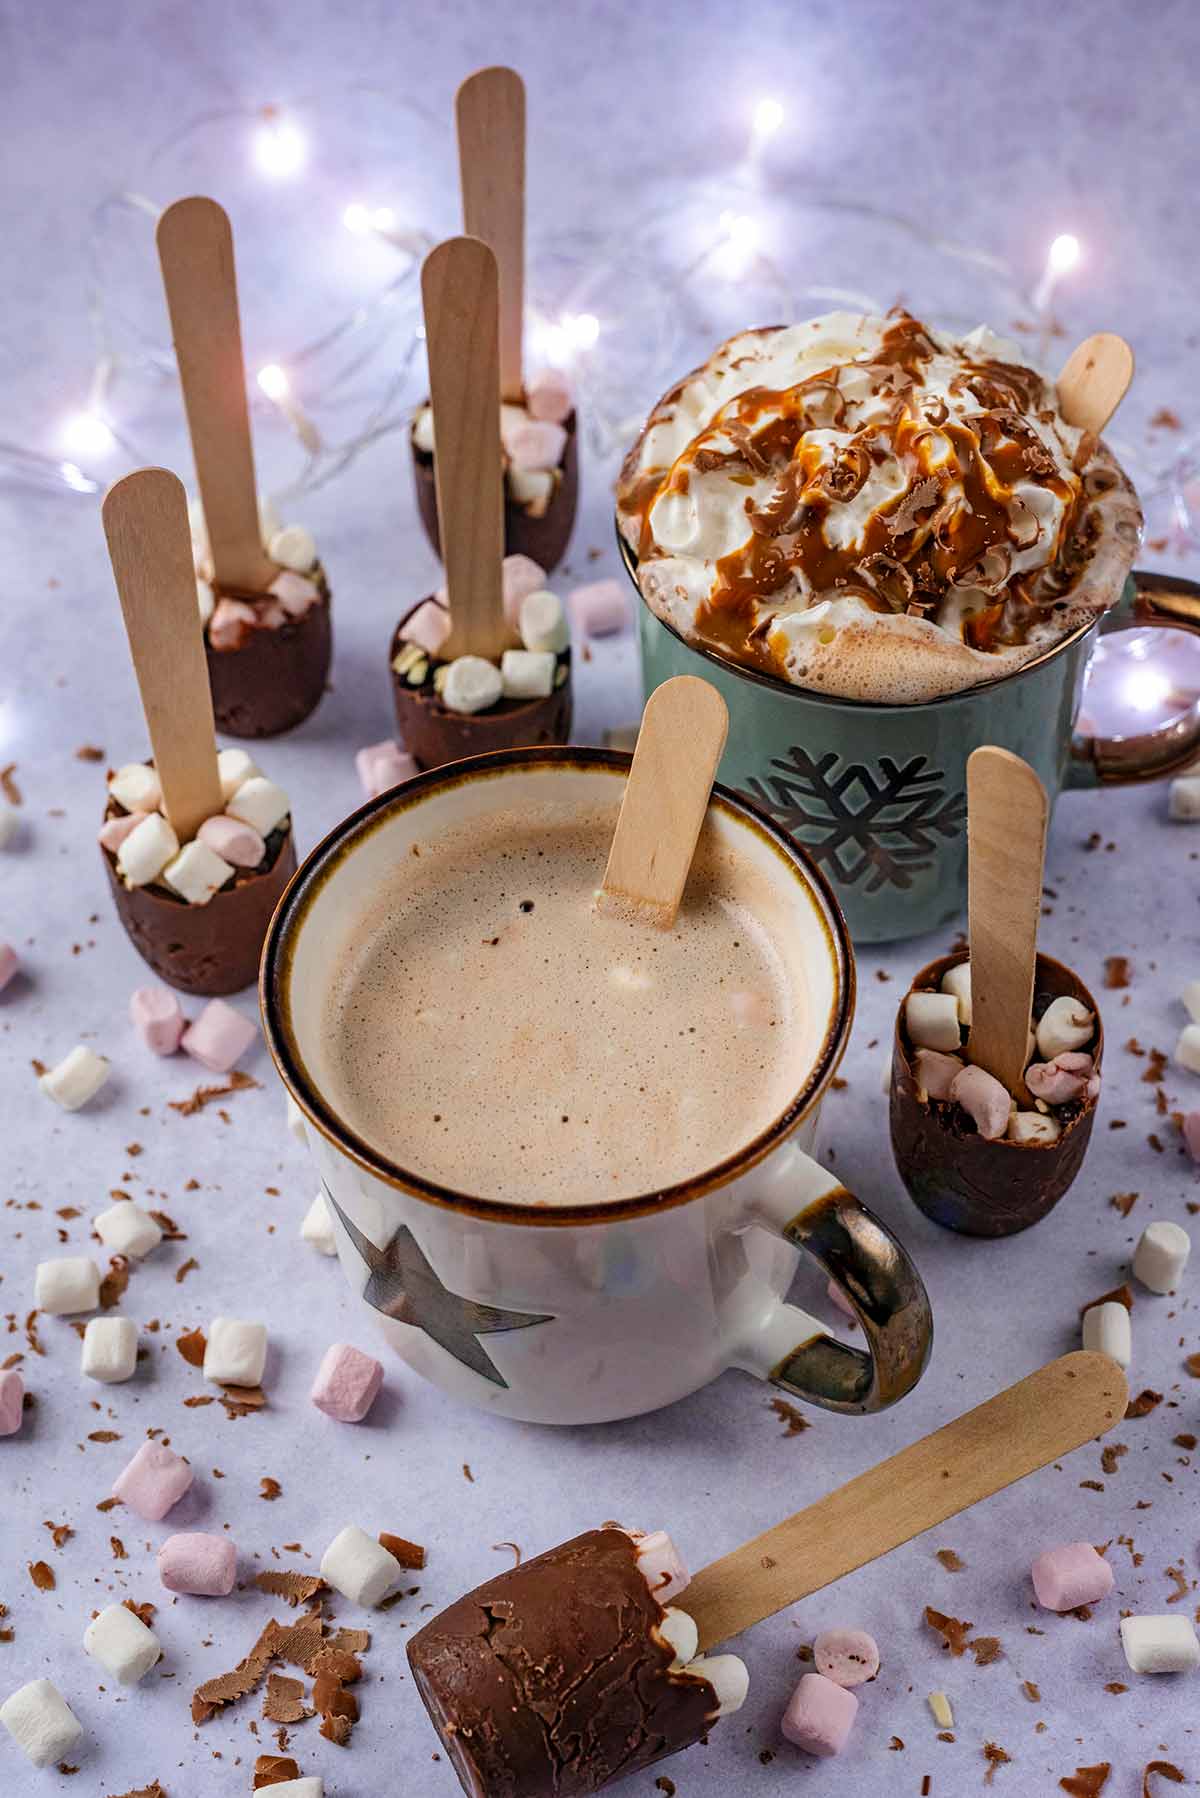 Mugs of hot chocolate surrounded by chocolate spoons and fairy lights.